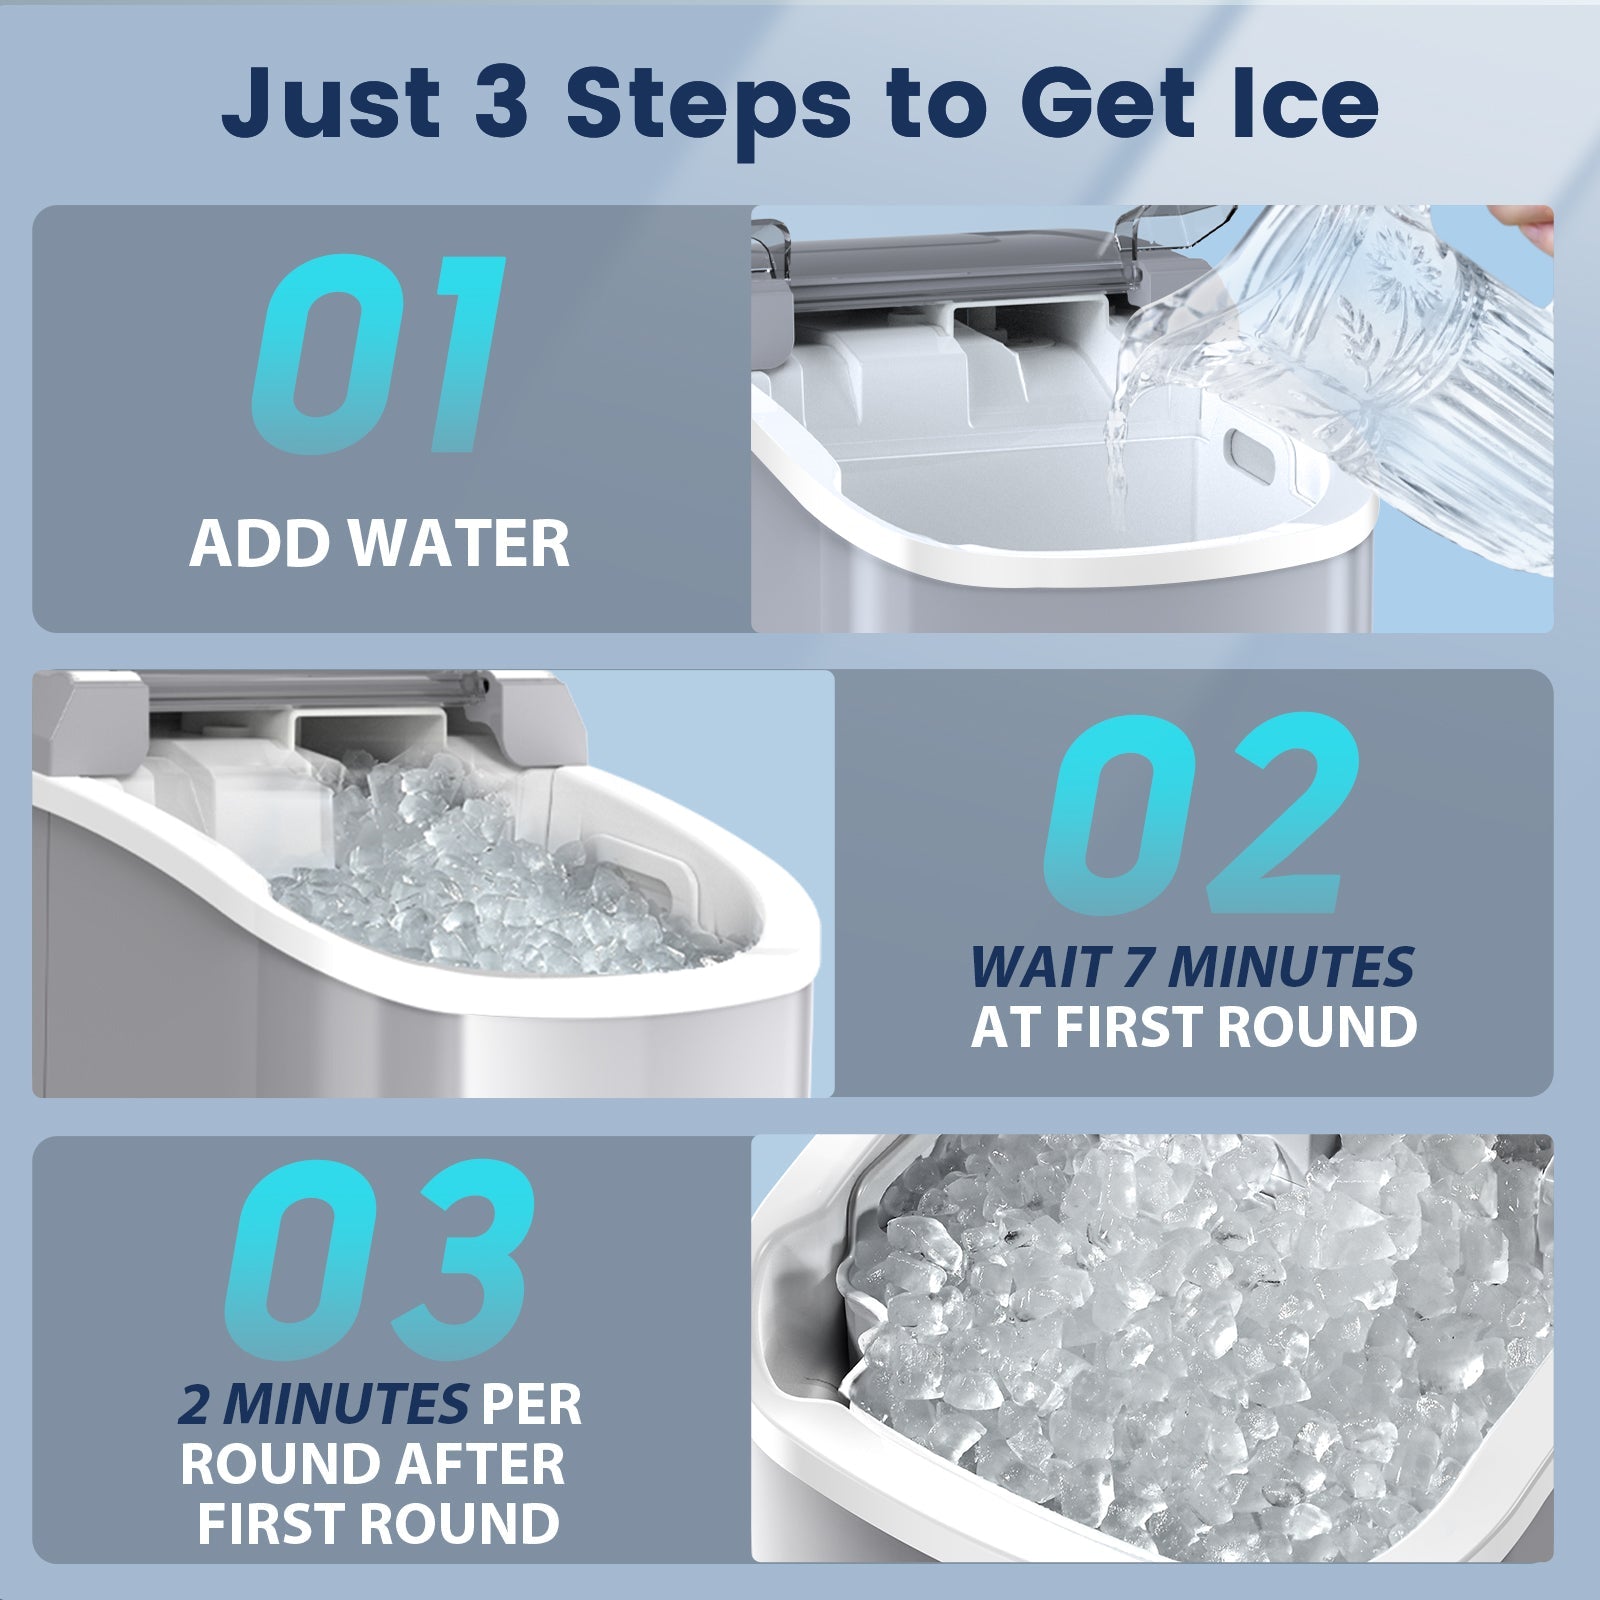 Make Zaxby's-Level Ice at Home with this Countertop Nugget Ice Maker